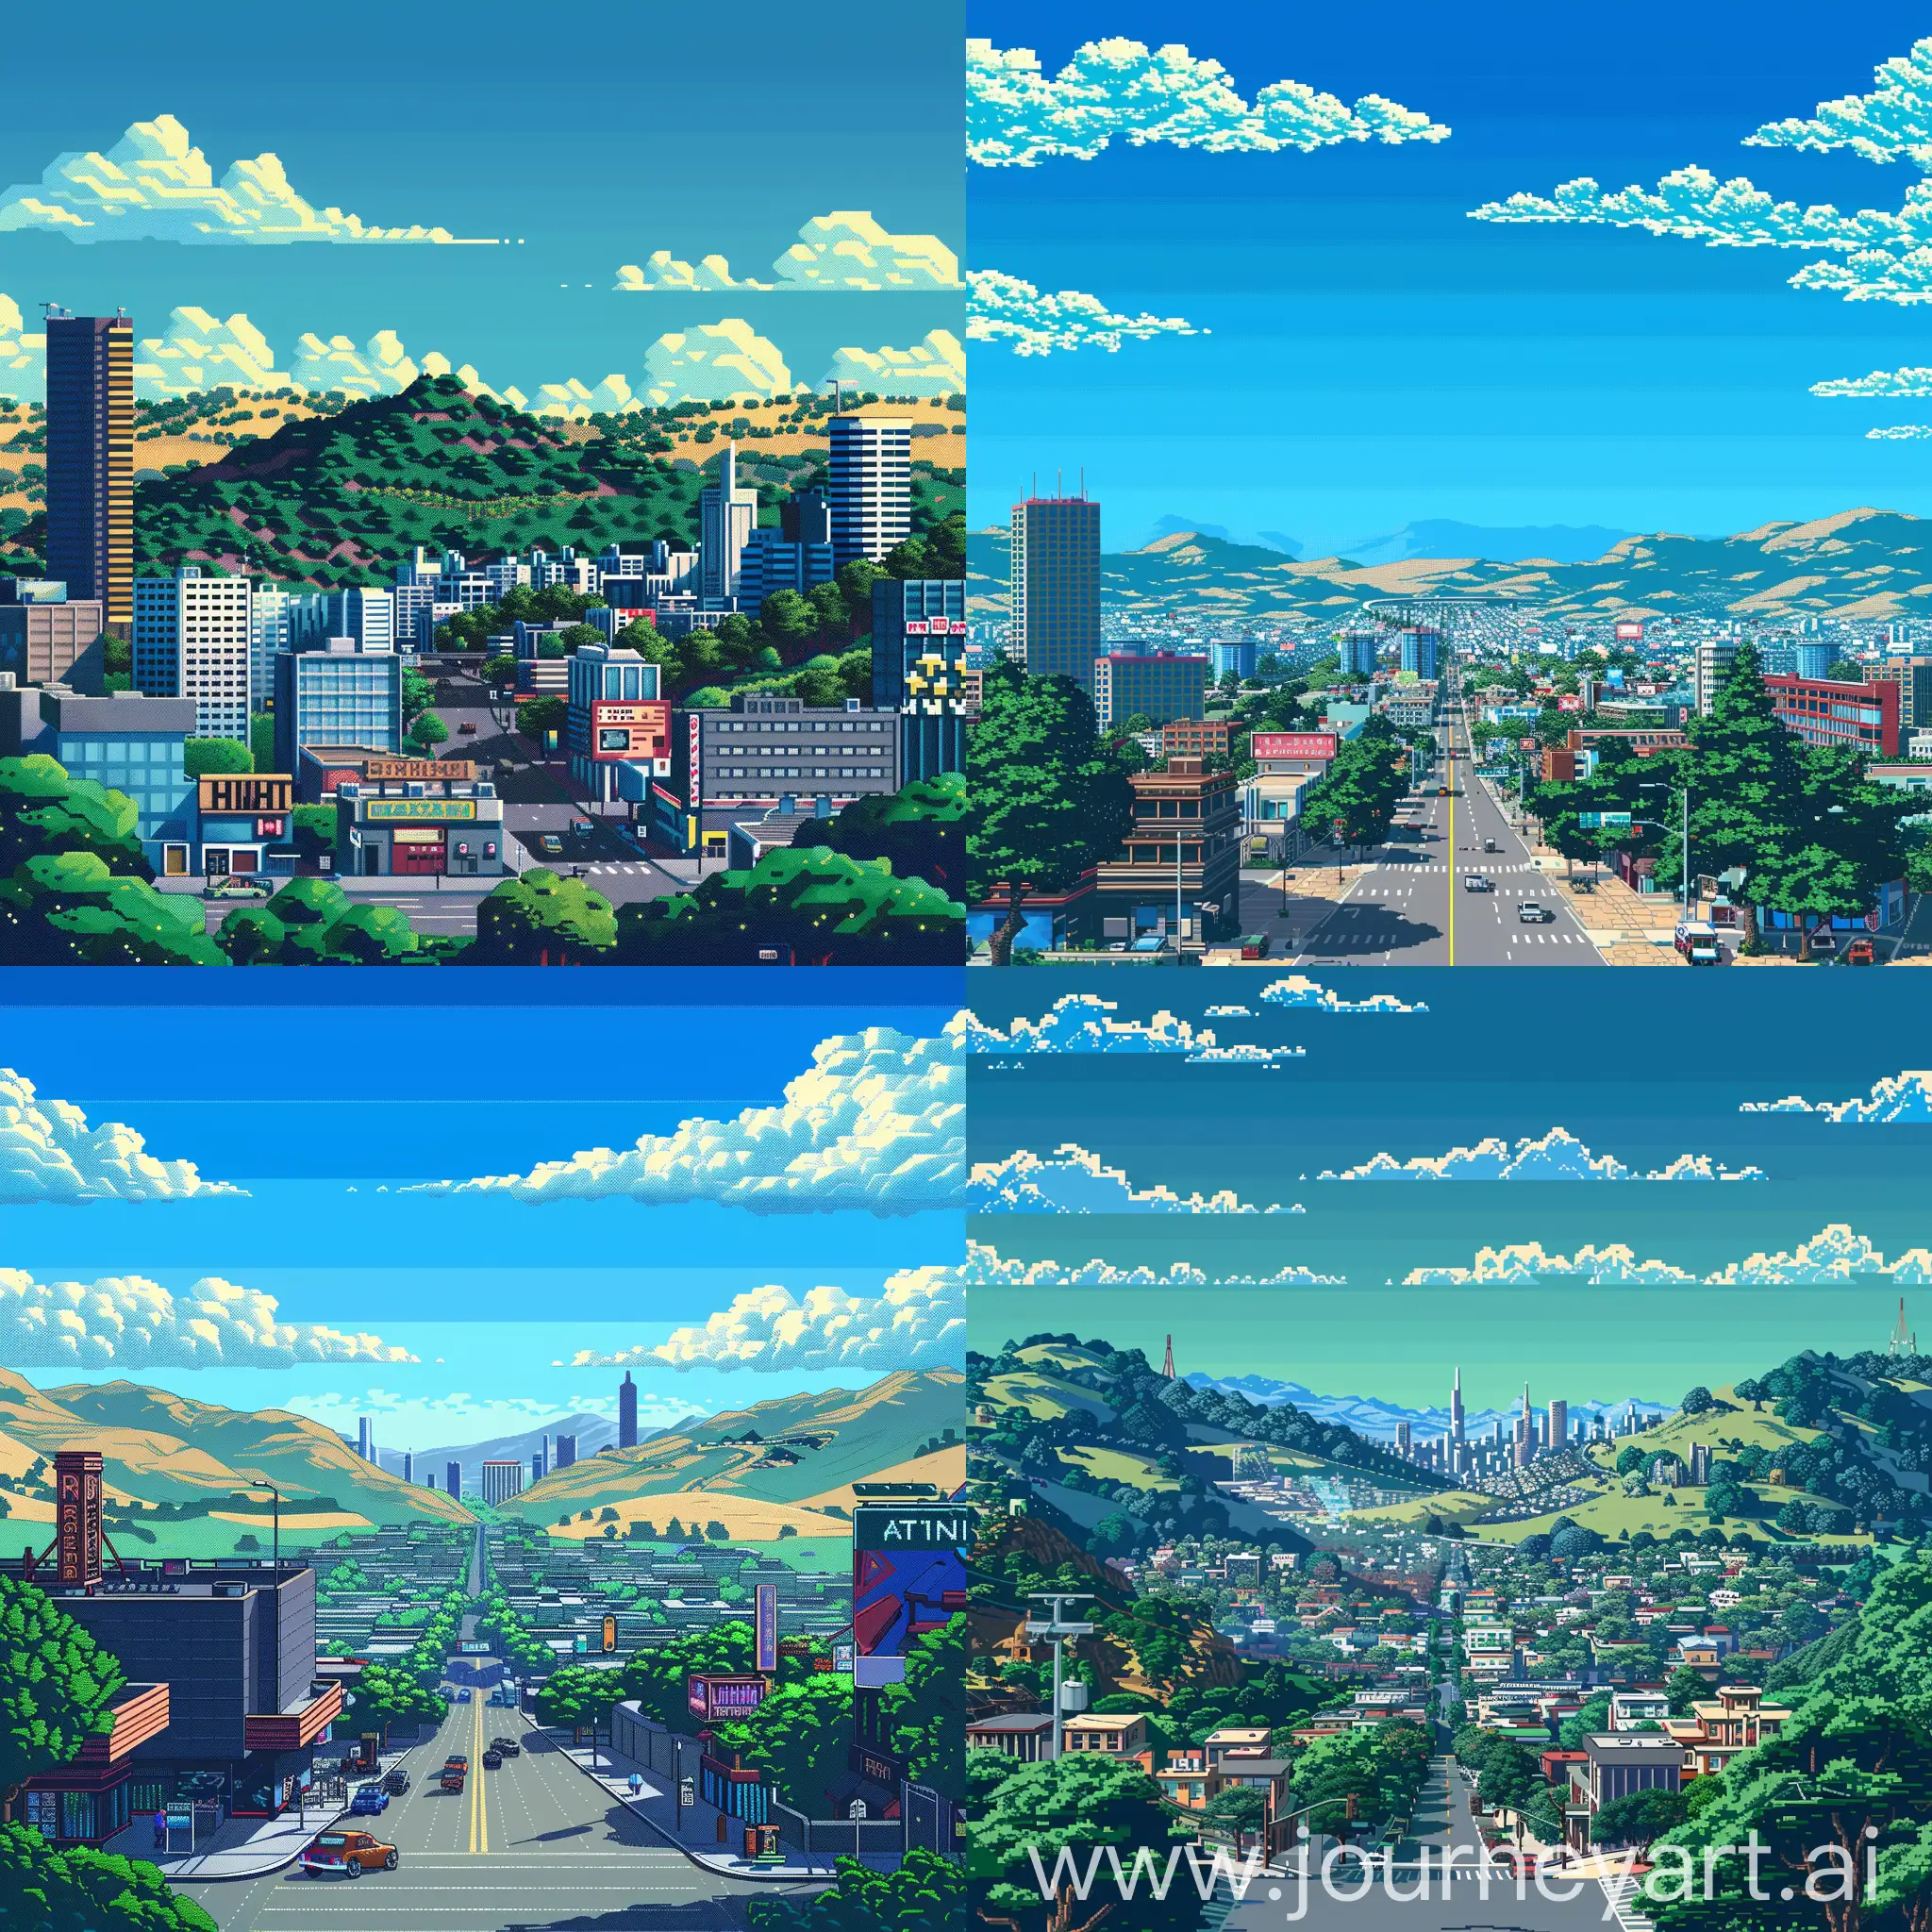 Retro-Silicon-Valley-Skyline-Pixel-Art-Cityscape-with-Clear-Blue-Skies